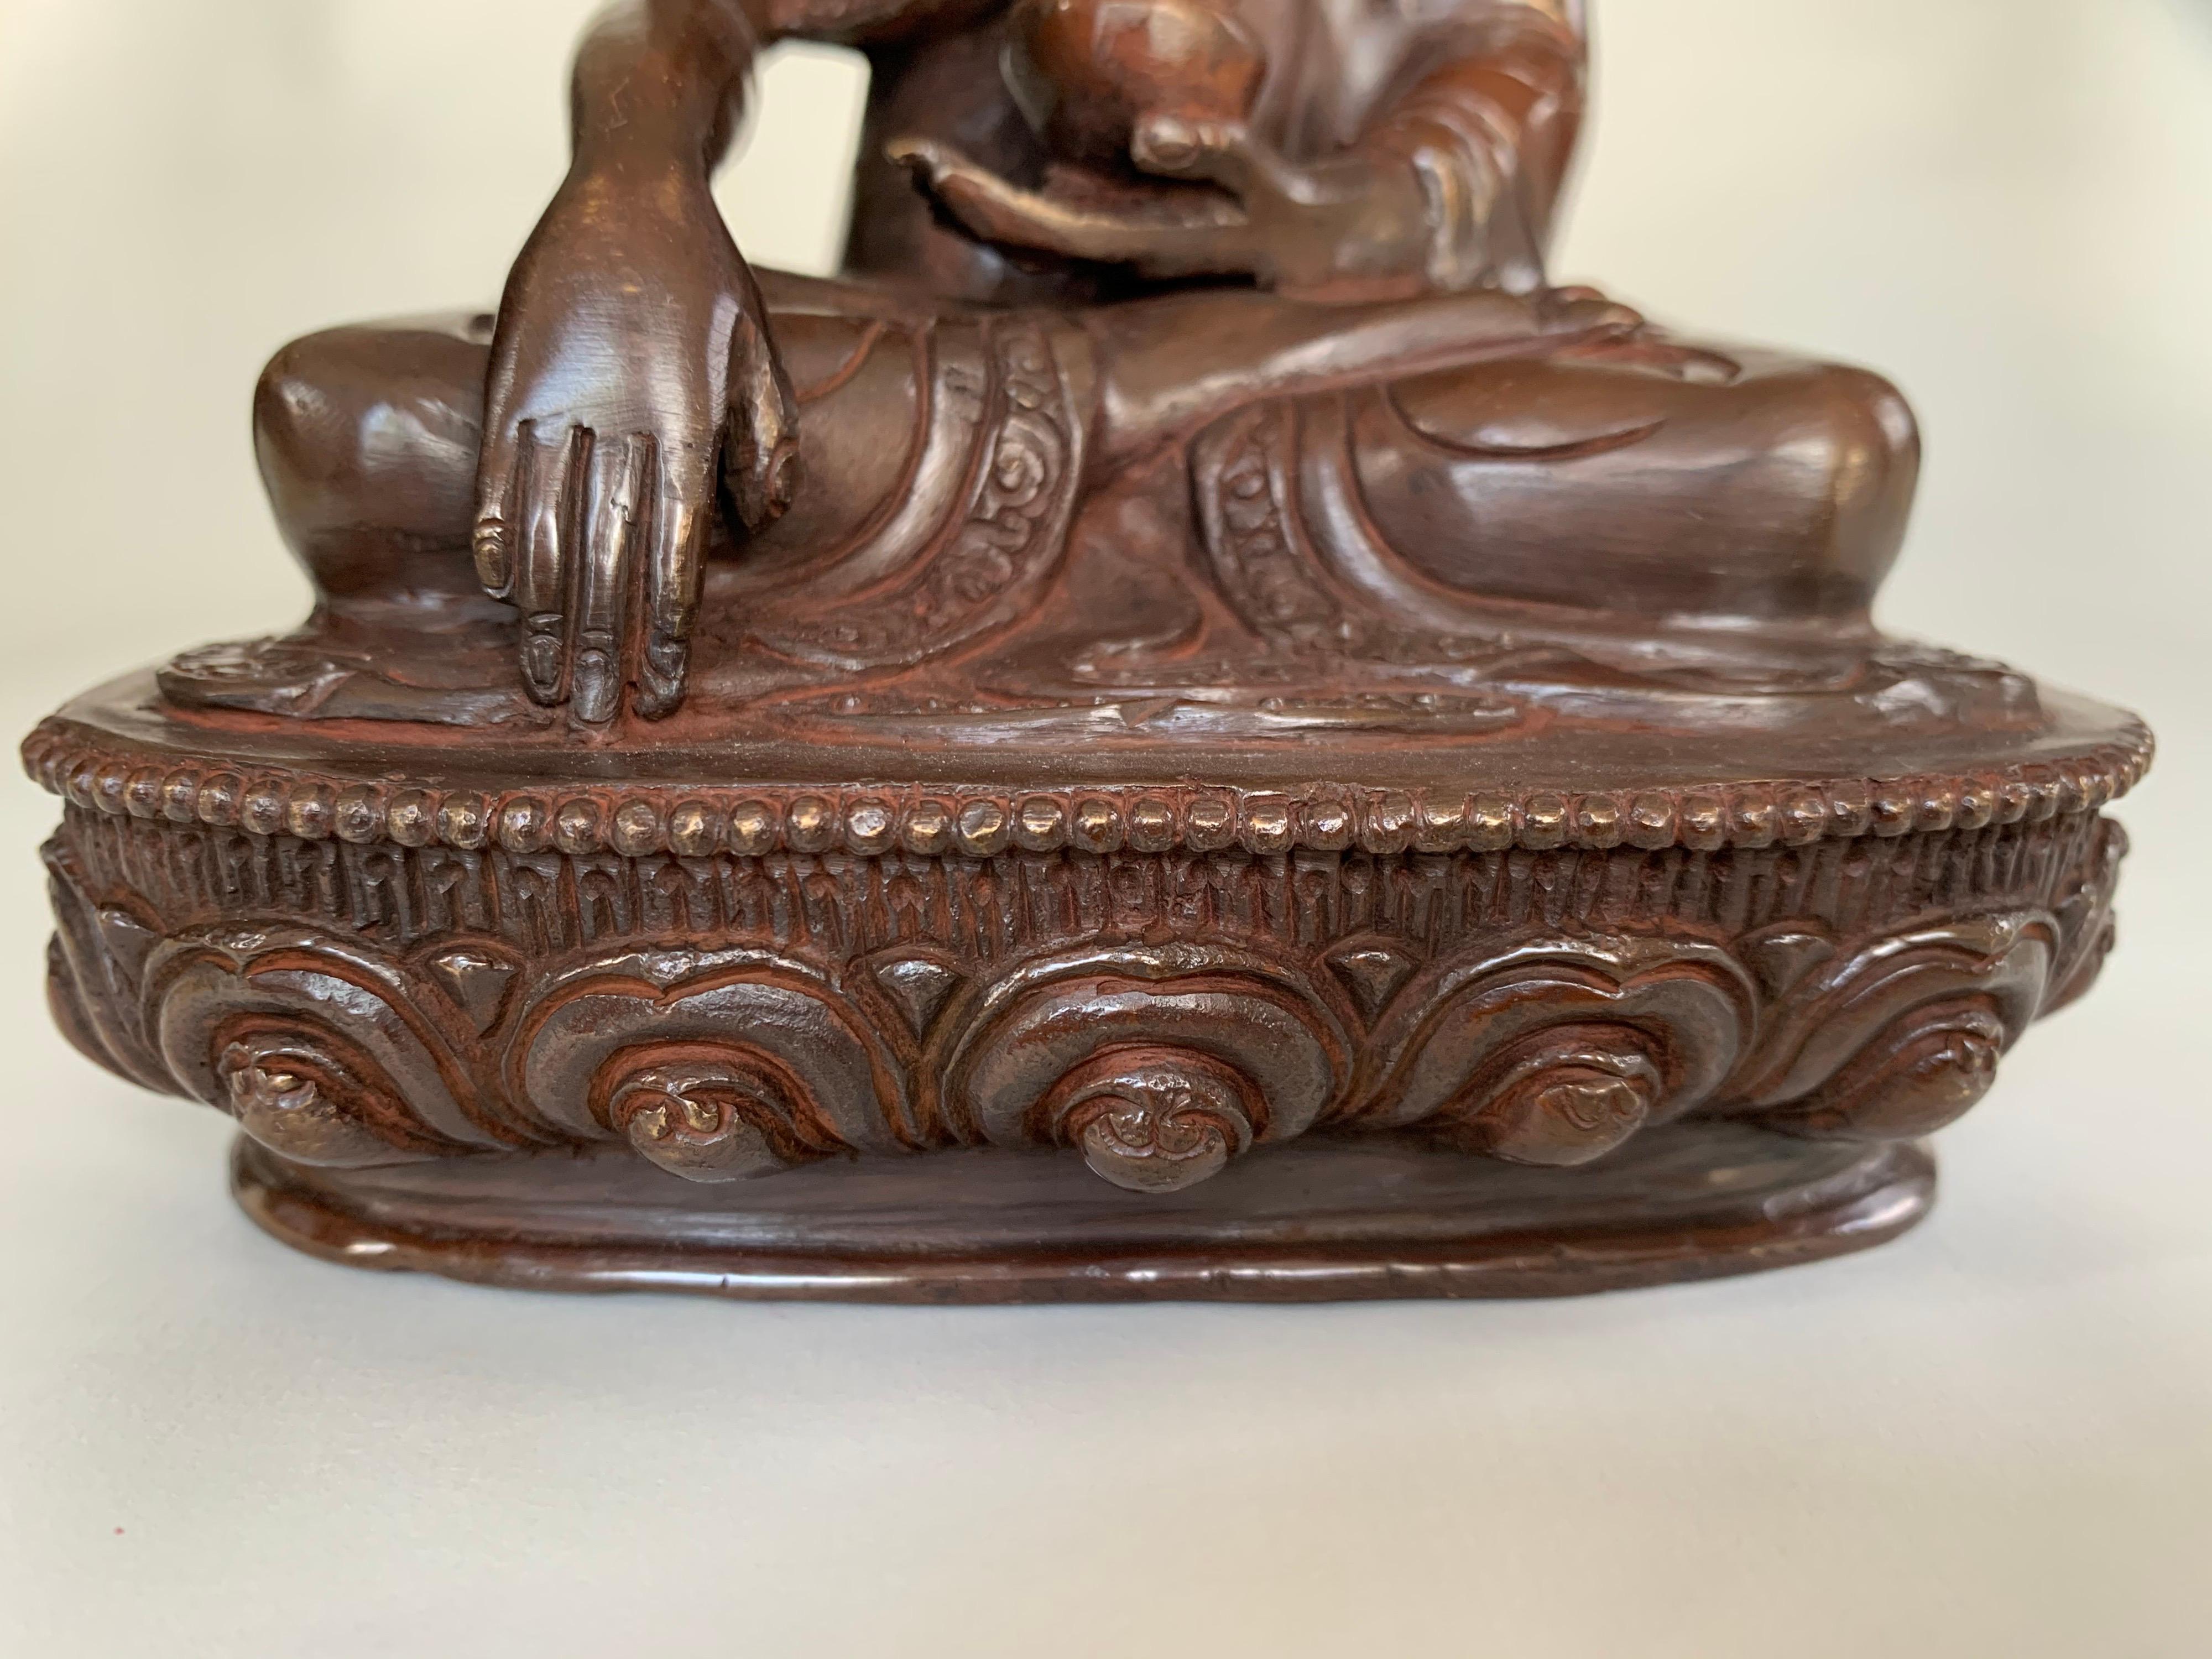 Buddha Statue 7.5 Inch Handcrafted by Lost Wax Process 1